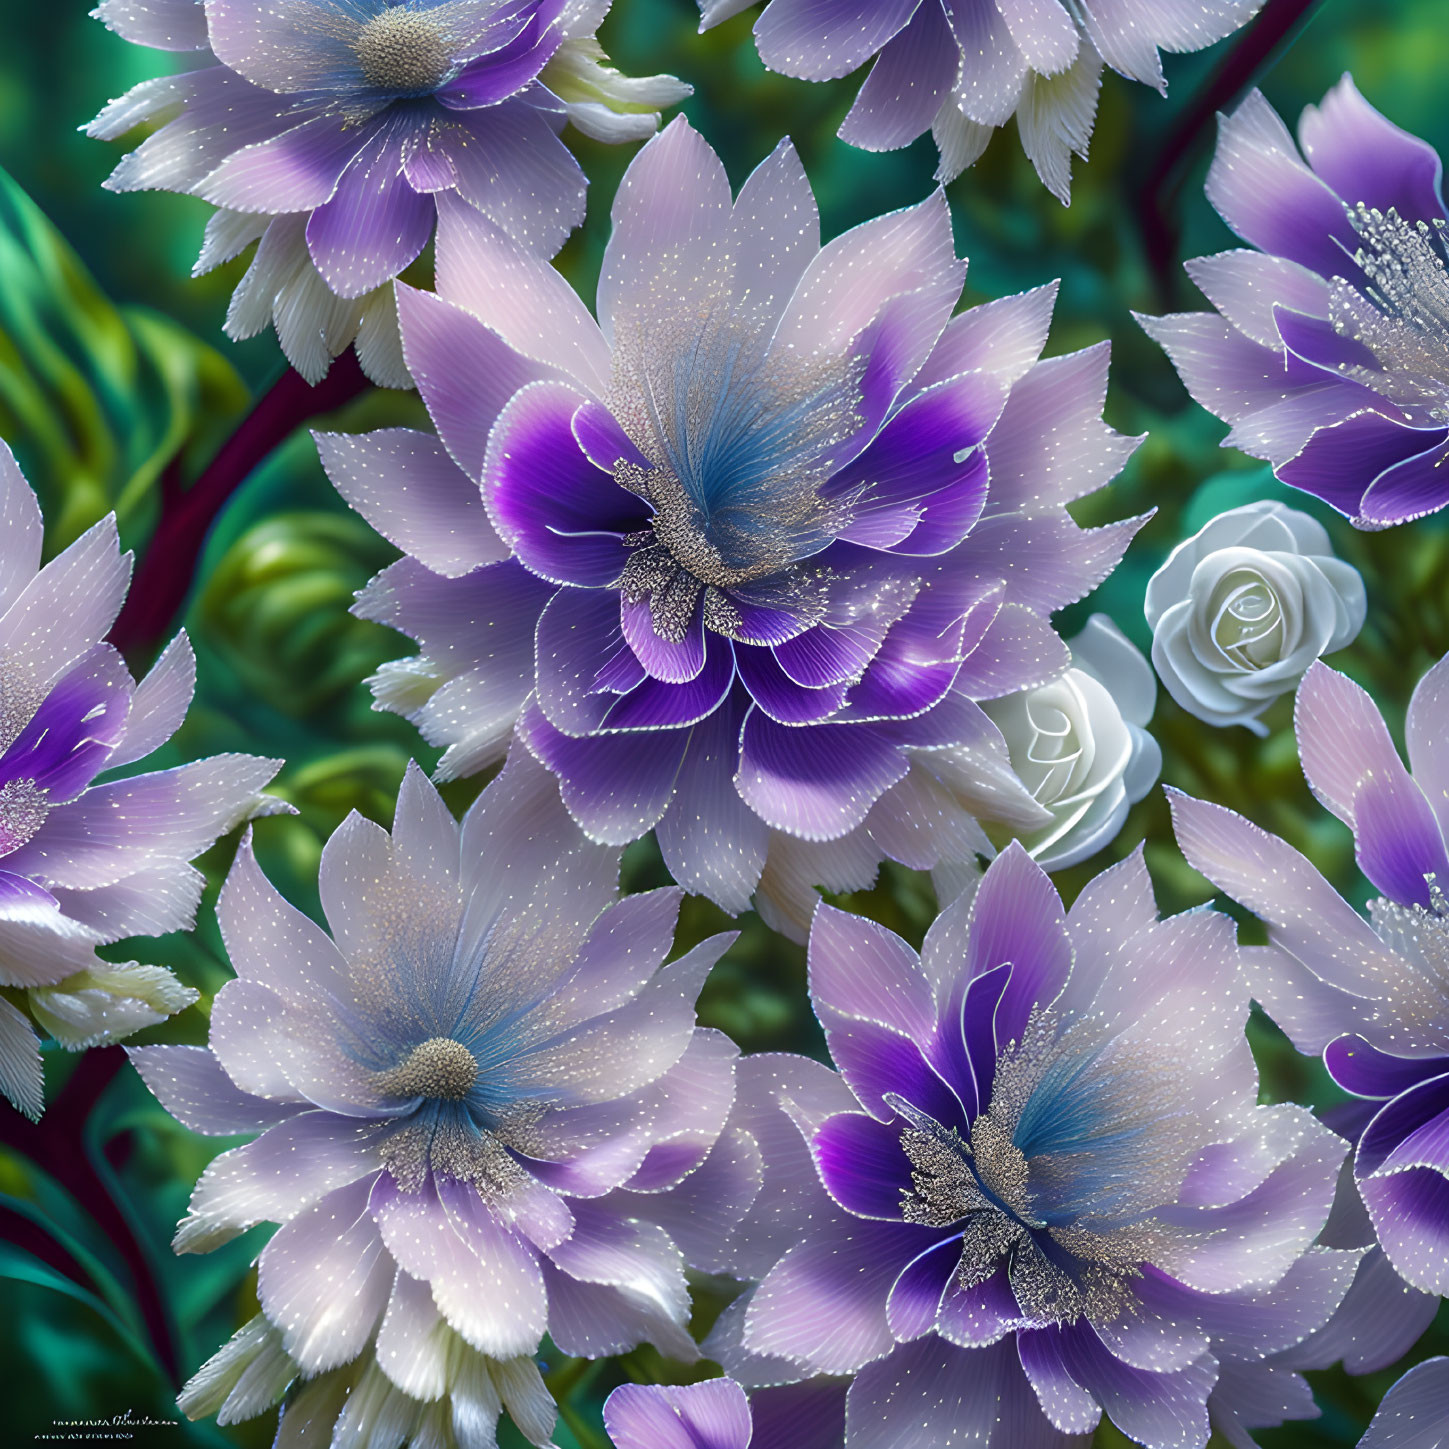 Vibrant Purple Flowers with White Highlights and Stamen Details Among Green Foliage